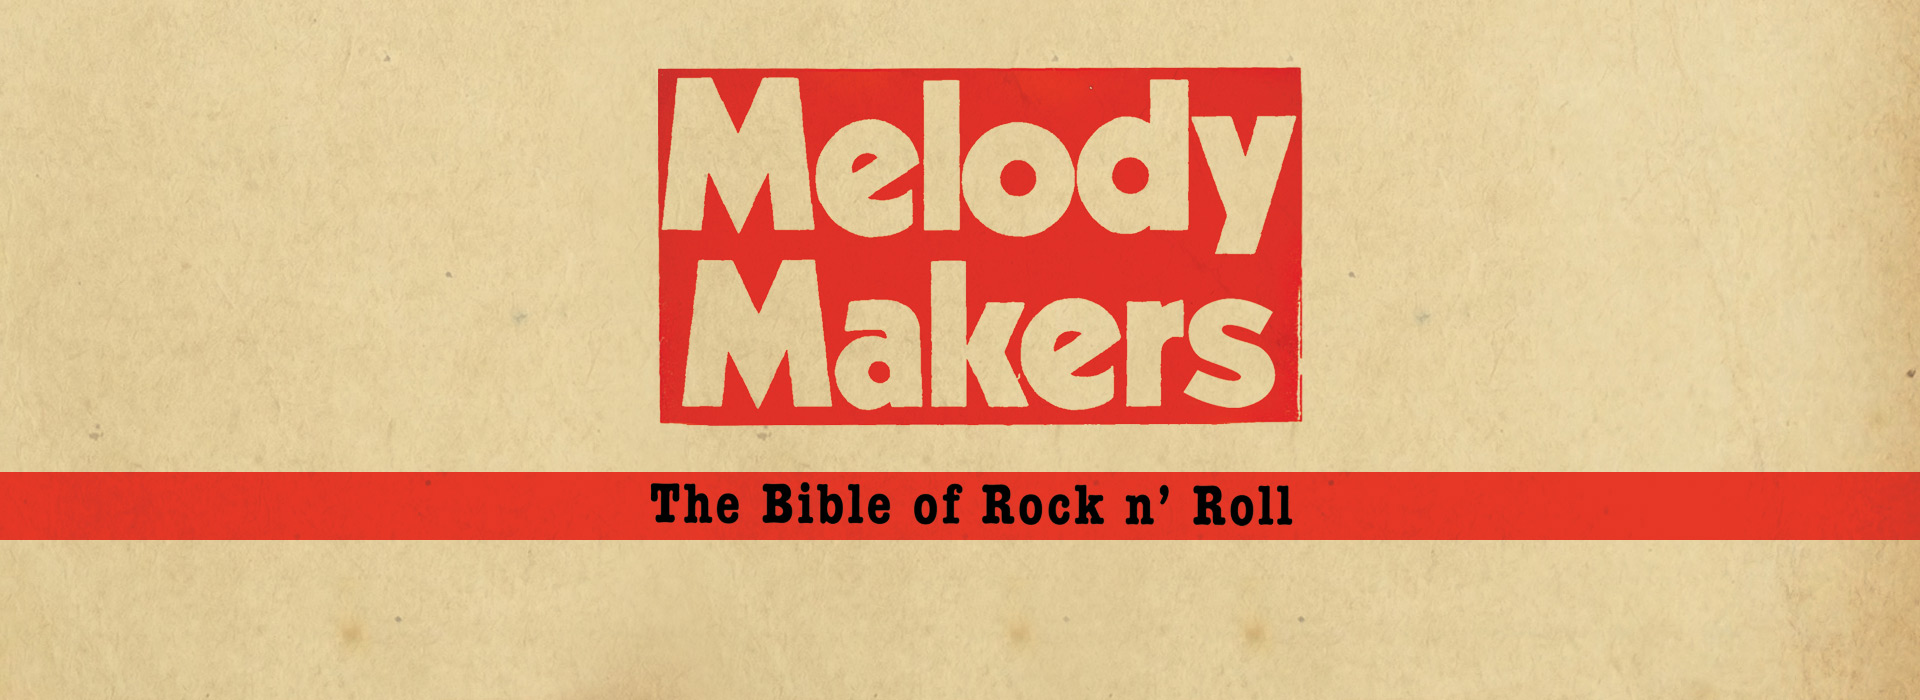 Melody Makers - The Bible of Rock n' Roll